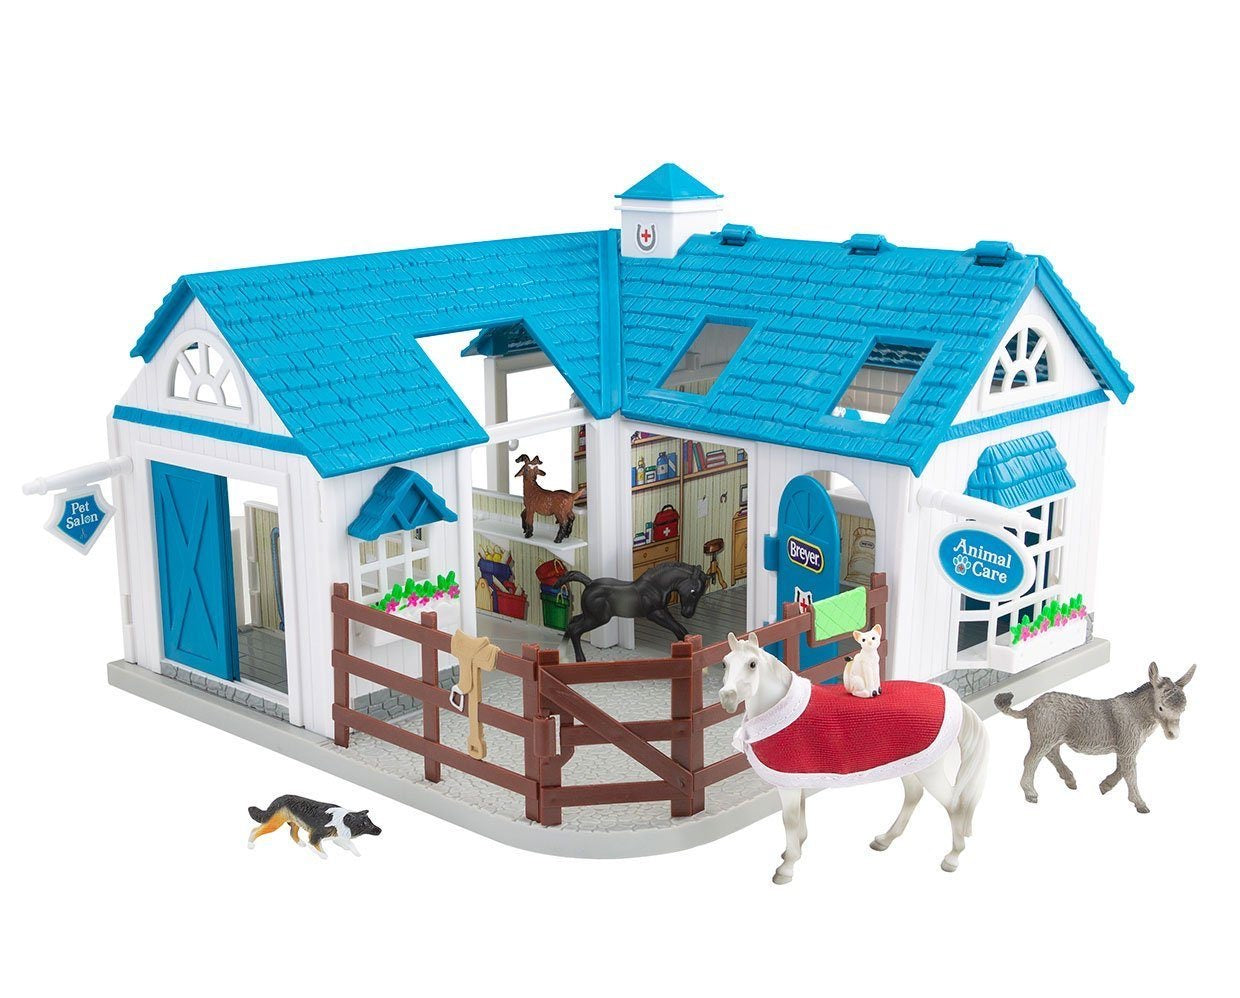 Breyer Stablemates Deluxe Animal Hospital - Blue Roof